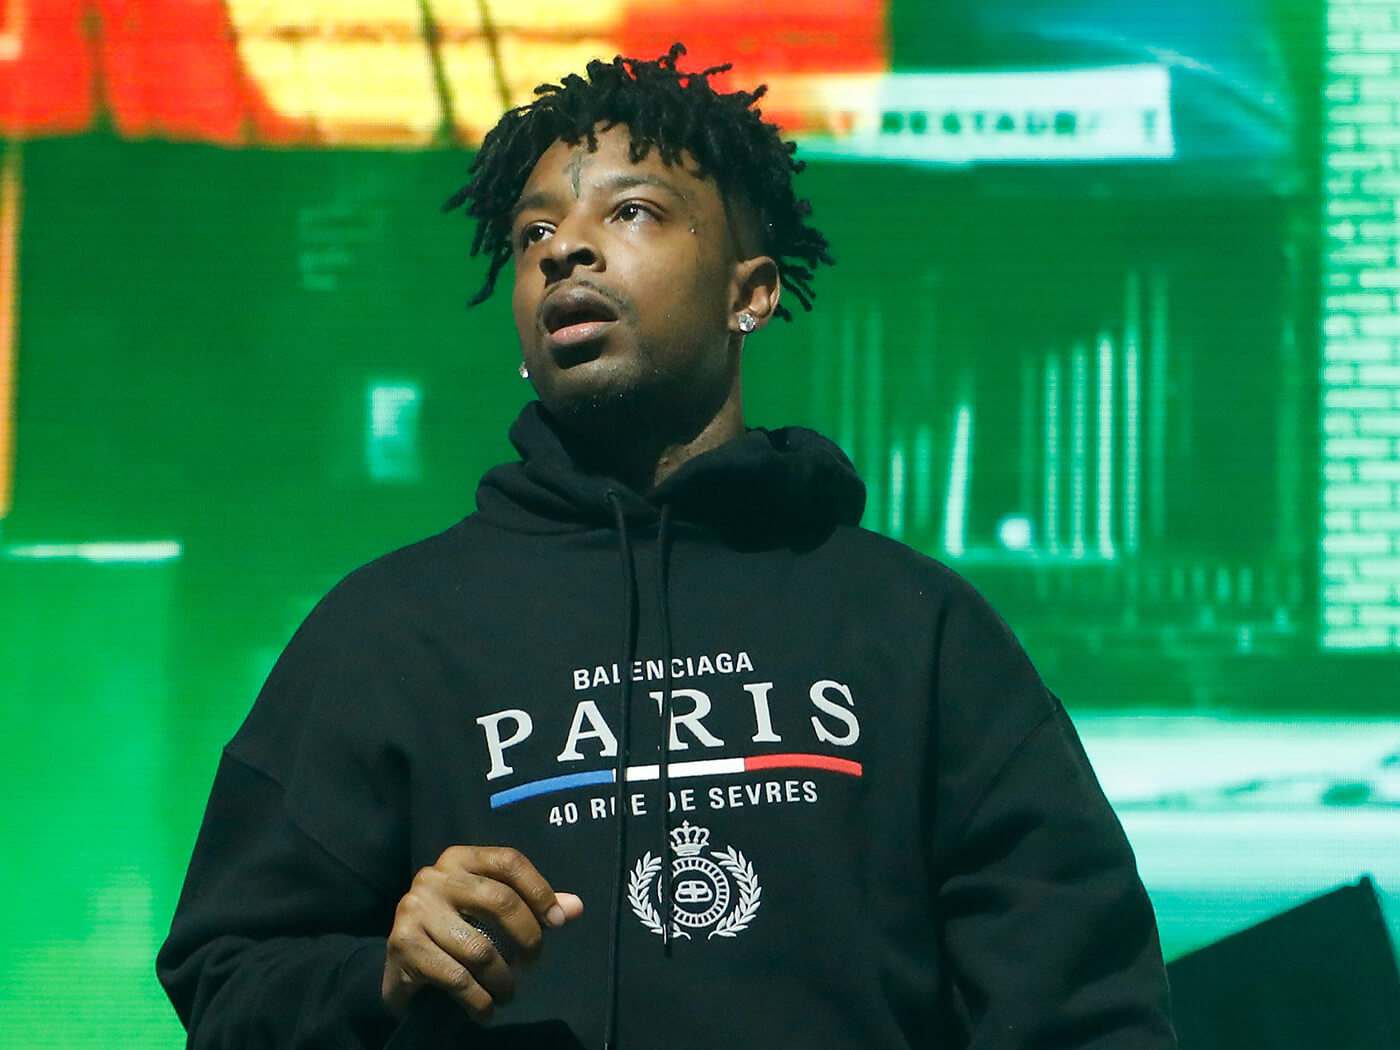 21 Savage Performs On Stage - Normani And 21 Savage , HD Wallpaper & Backgrounds